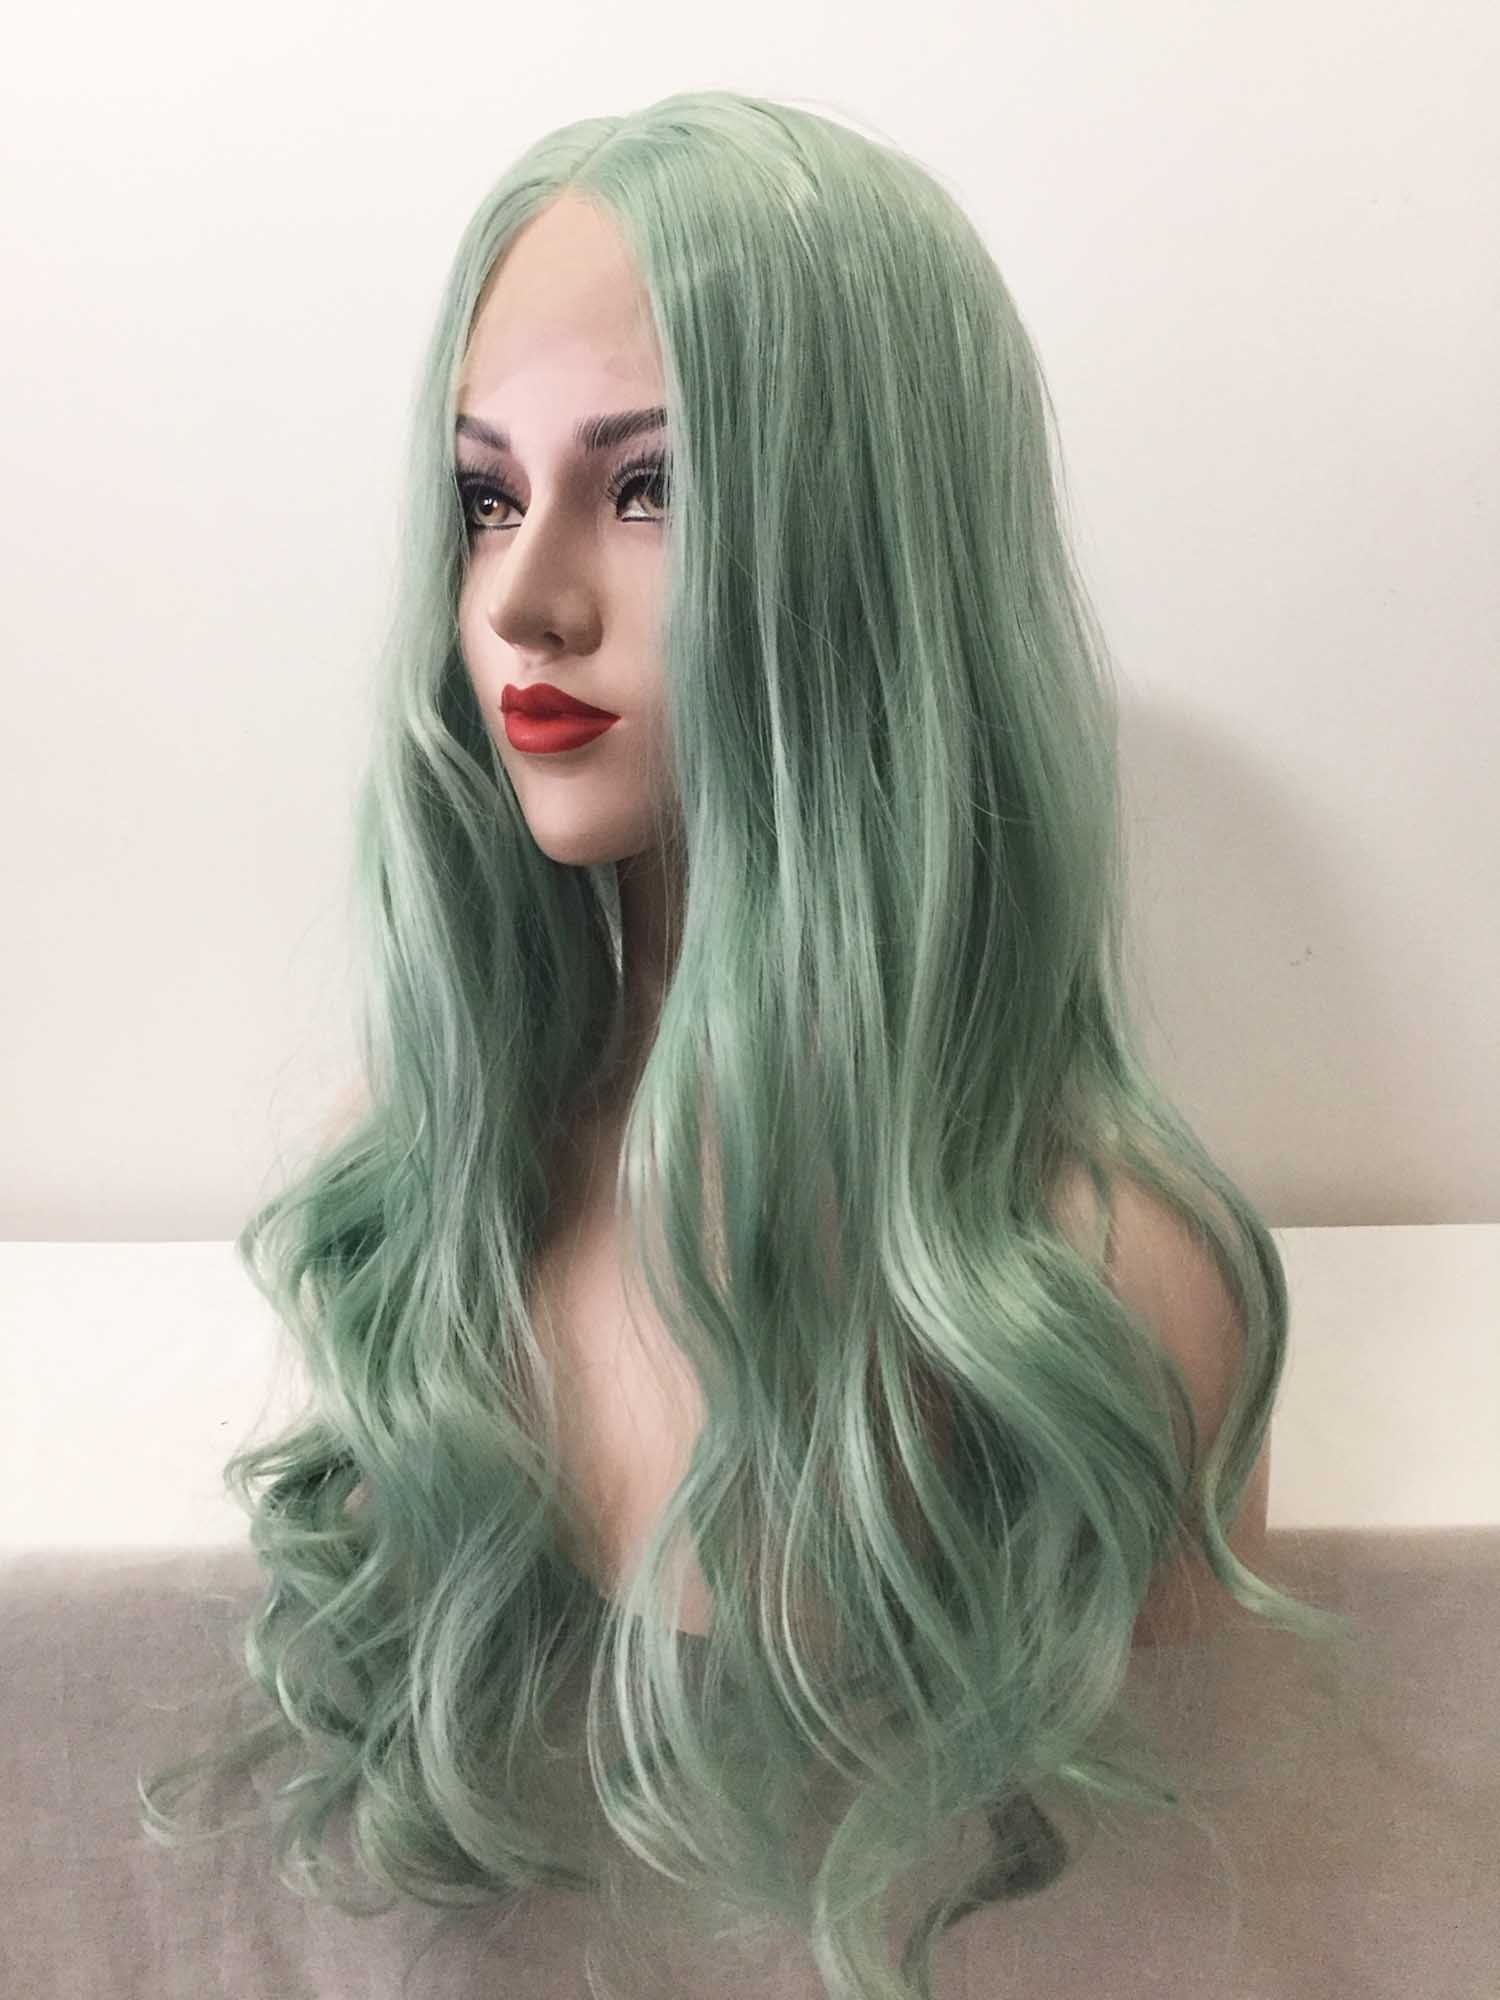 nevermindyrhead Women Lace Front Pastel Green Middle Part Long Curly Wavy Hair Wig